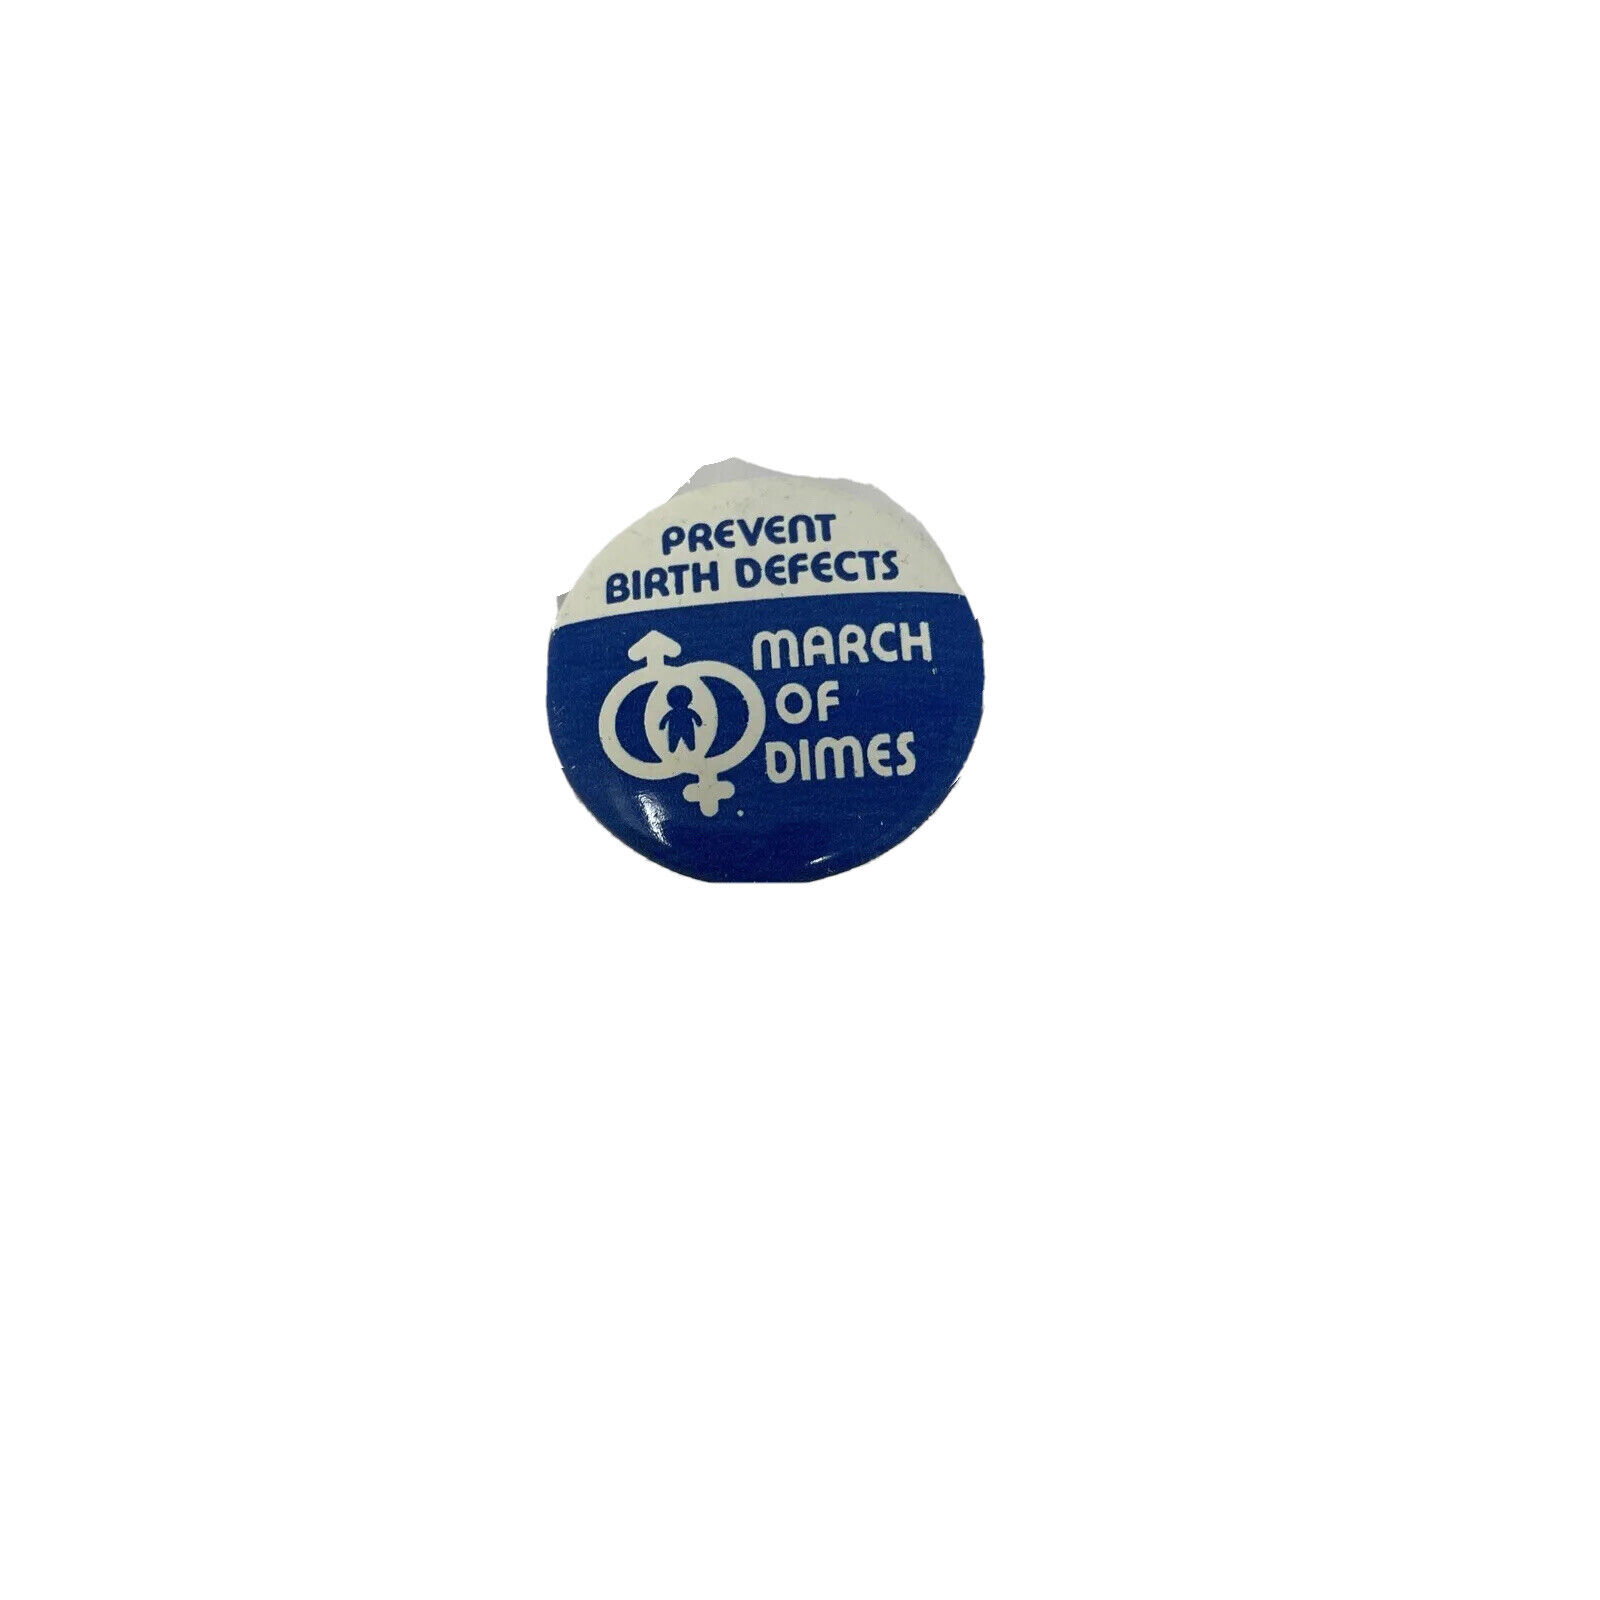 March Of Dimes * Prevent Birth Defects * Blue and White Pin Pinback Button